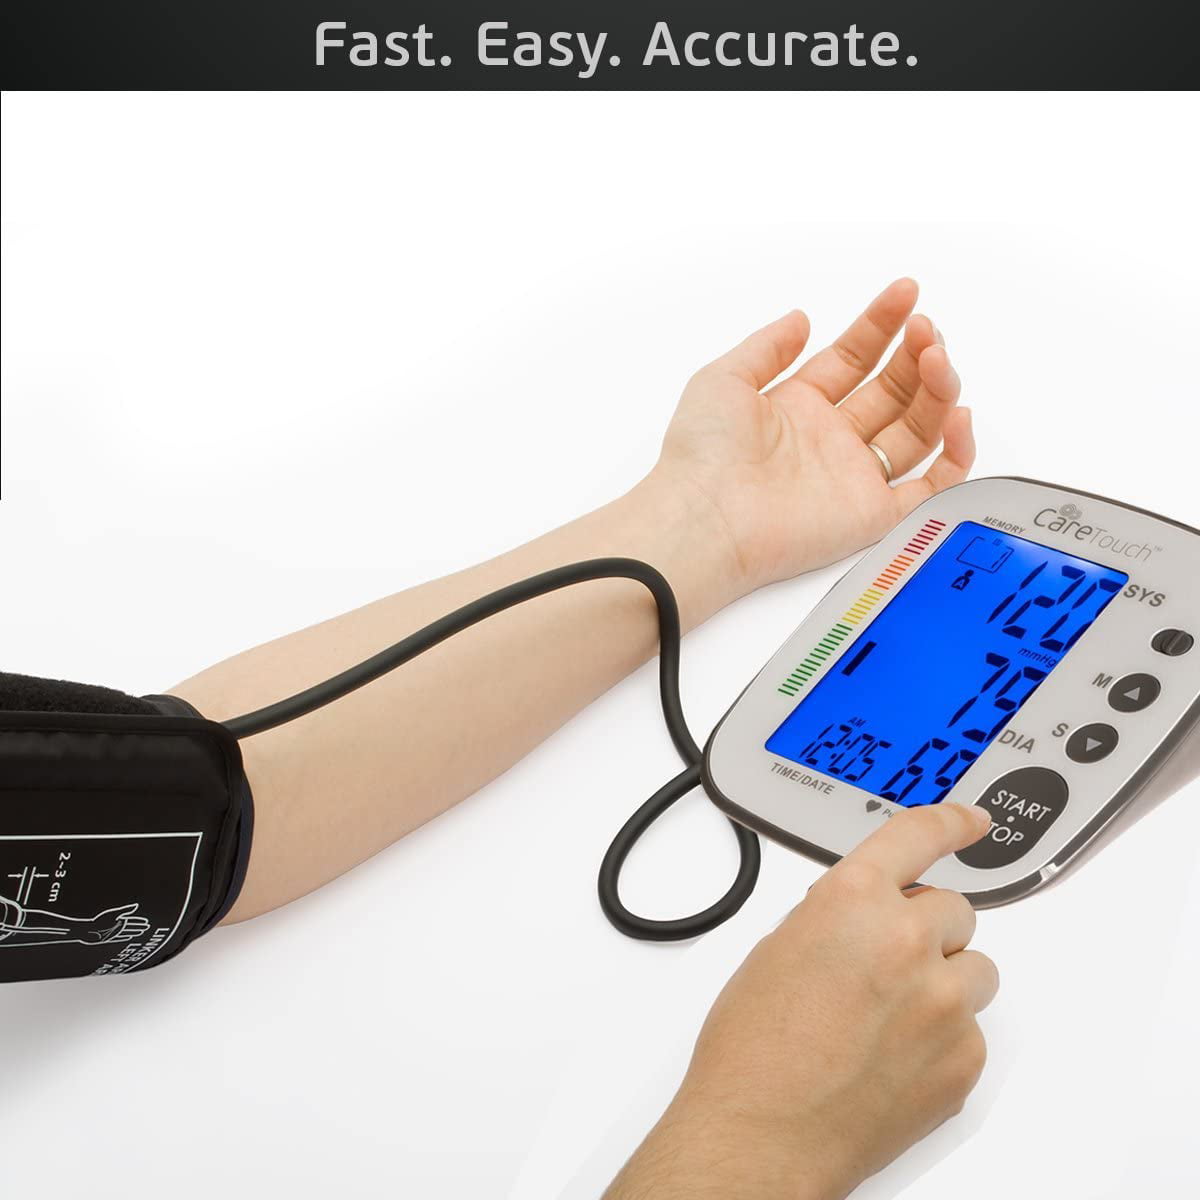 Care Touch Digital Wrist Blood Pressure Monitor, Wrist BP Cuff for Adults  Size 5.5-8.5, Blood Pressure Monitors for Home Use, Automatic High Blood